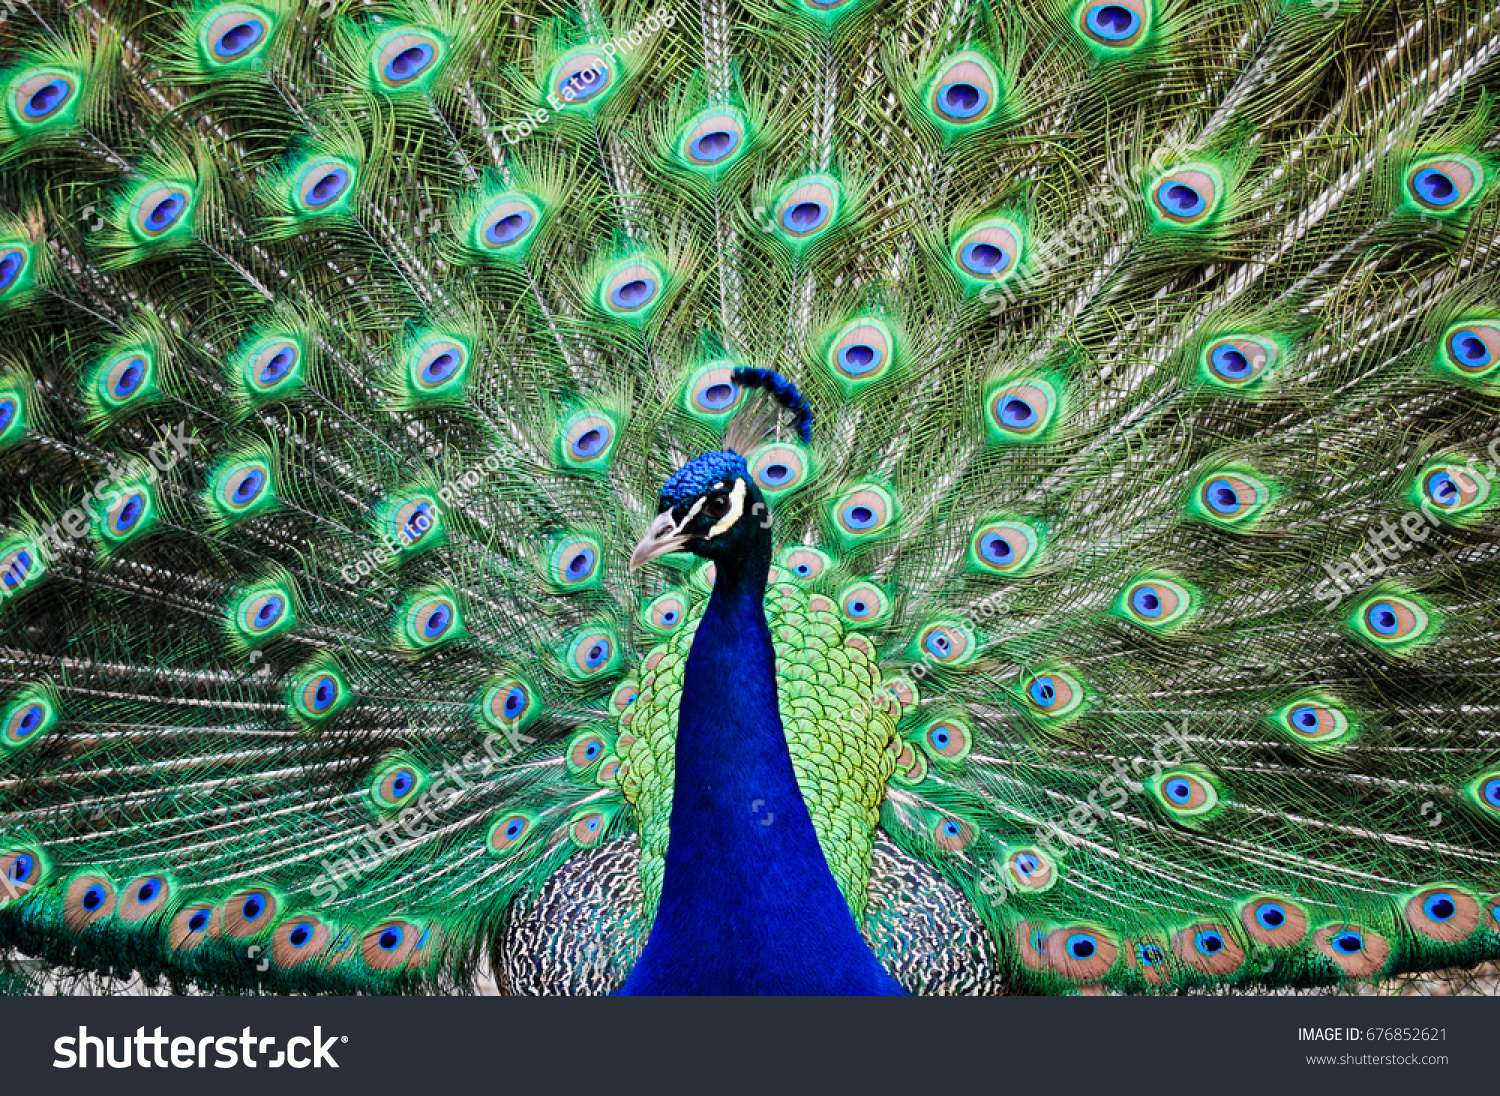 stock-photo-peacock-with-feathers-spread-676852621.jpg